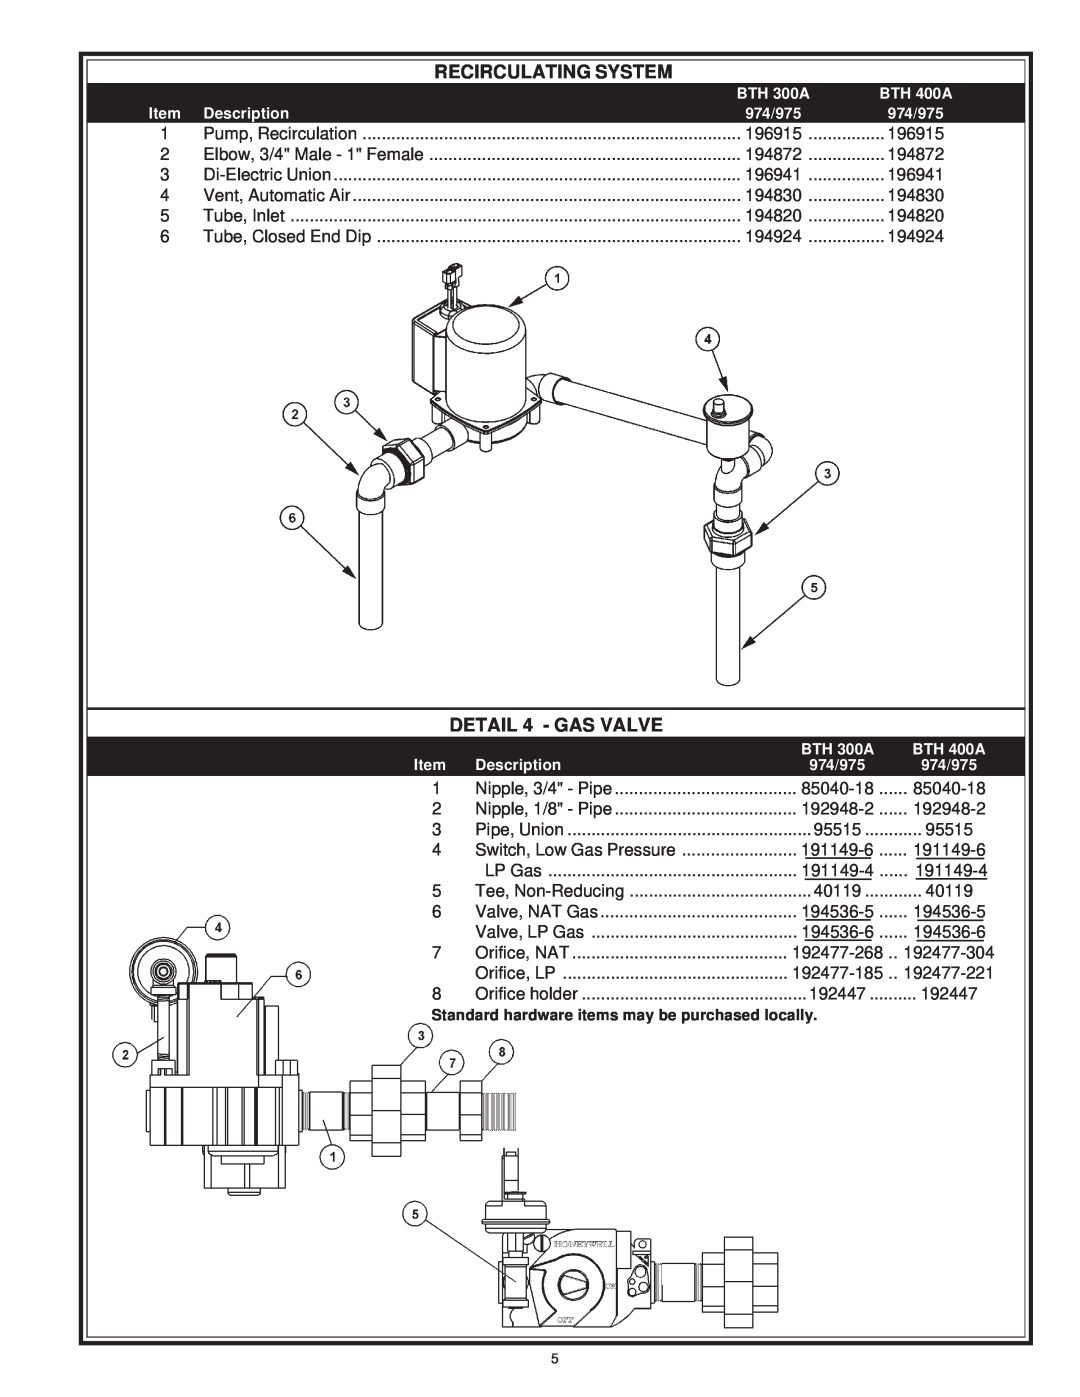 A.O. Smith 974 Series manual Recirculating System, DETAIL 4 - GAS VALVE, Standard hardware items may be purchased locally 